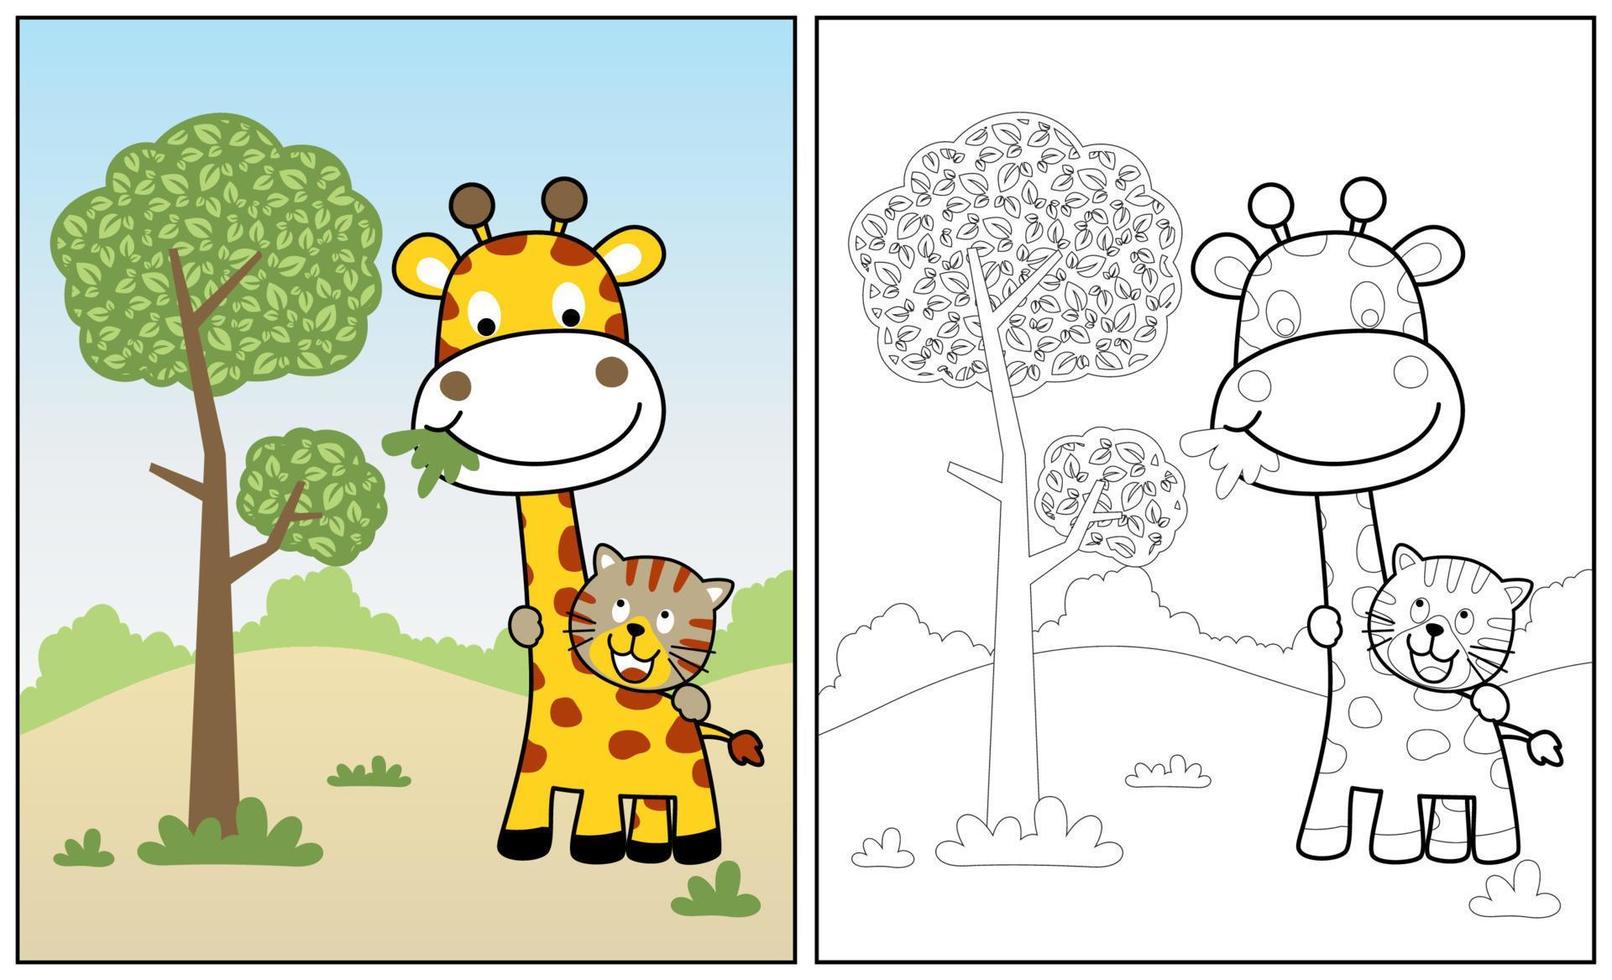 little tiger with giraffe in forest, vector cartoon illustration, coloring page or book